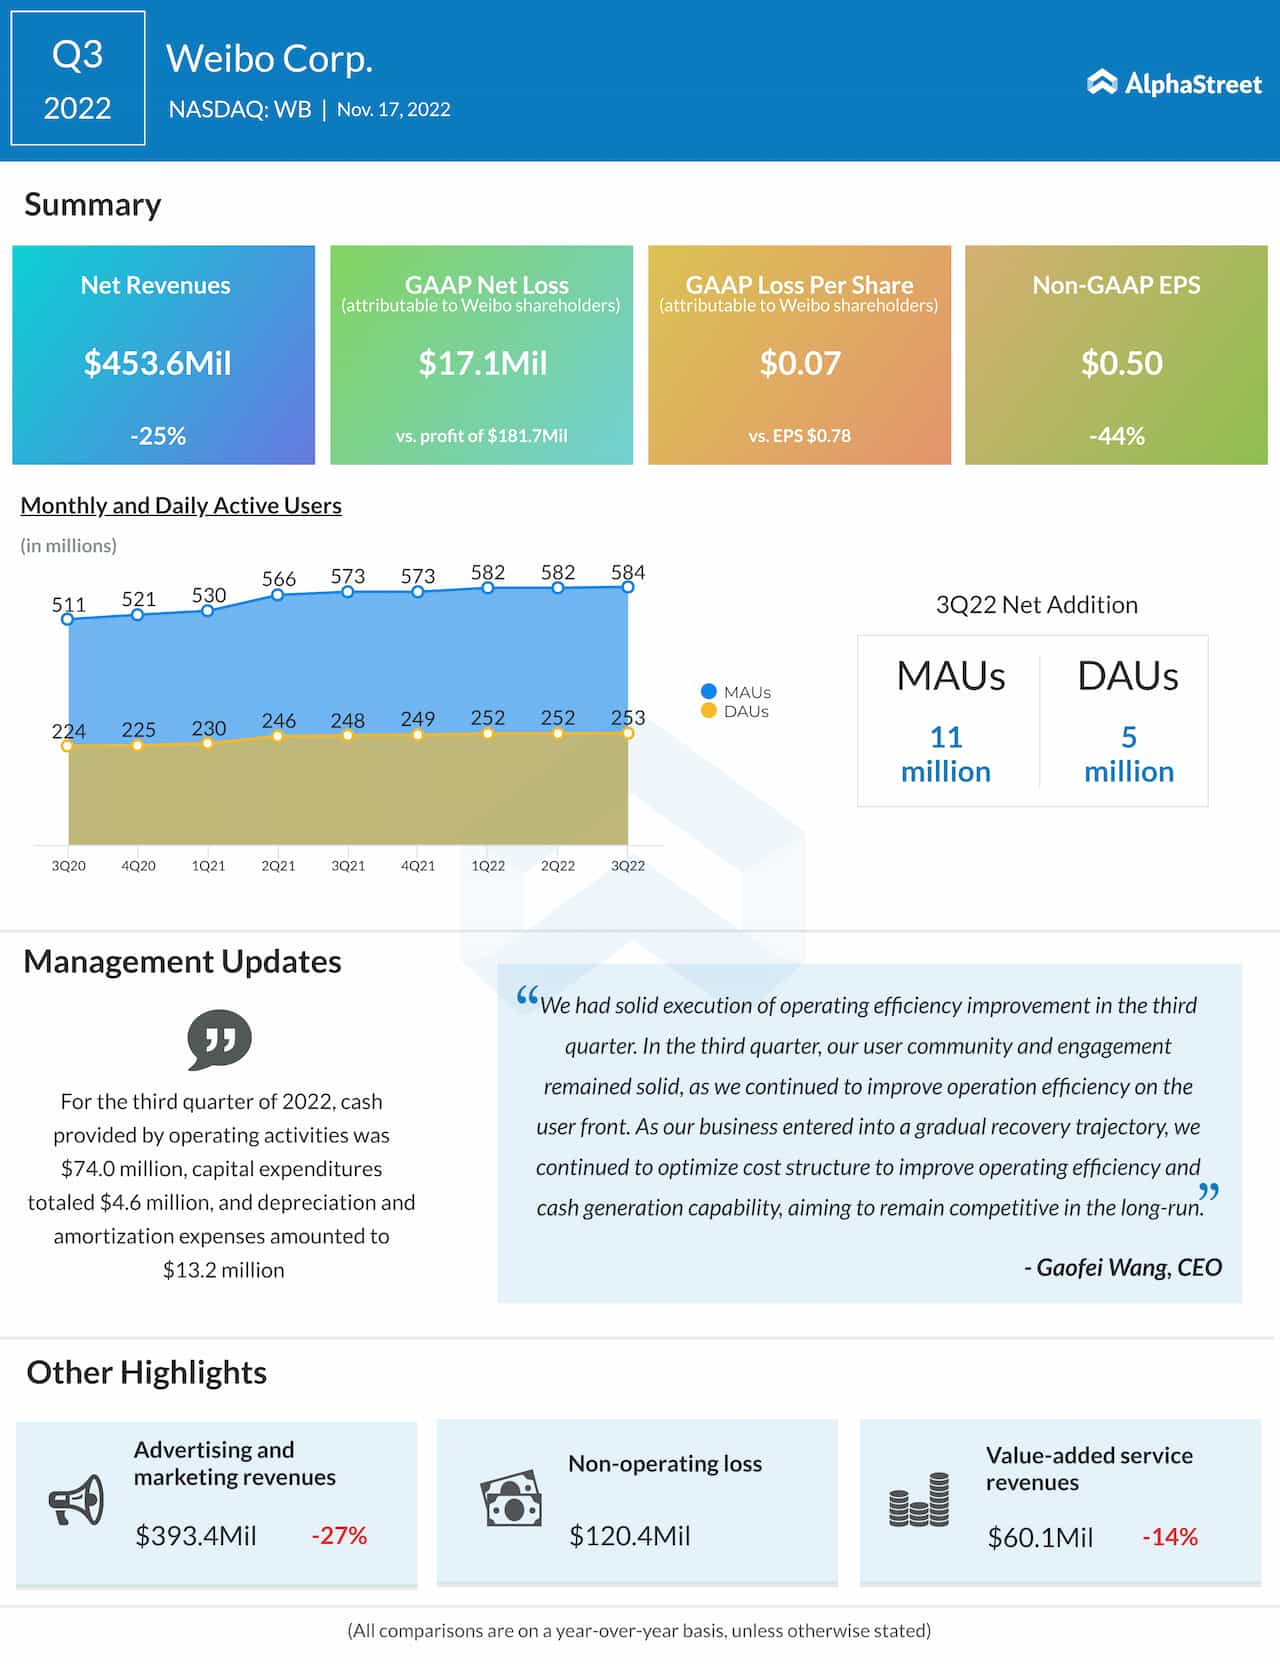 Earnings Infographic: Highlights of Weibo’s Q3 2022 results